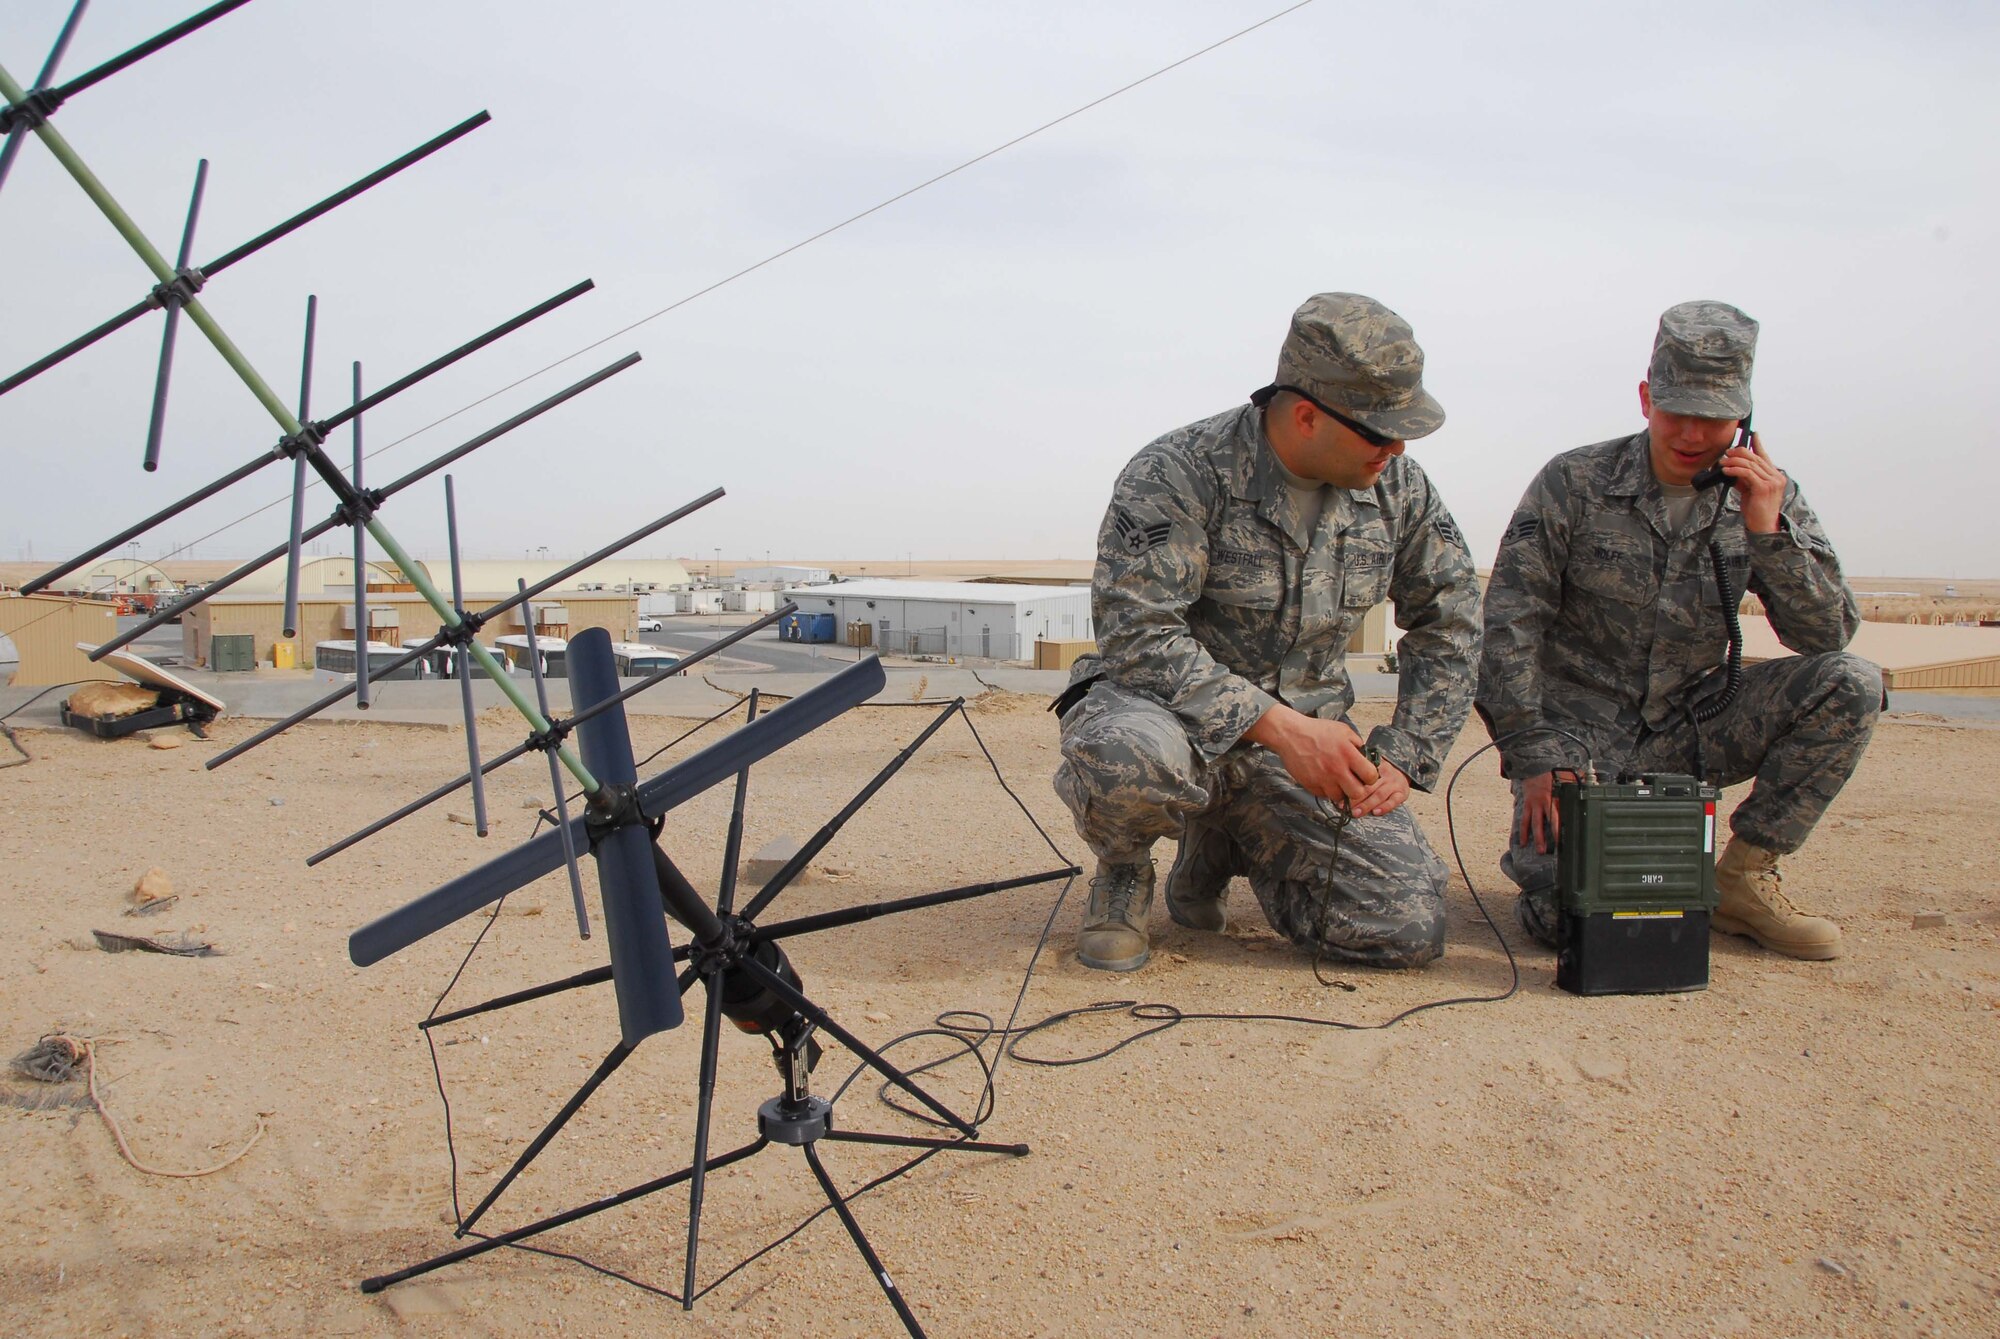 SOUTHWEST ASIA -- Senior Airman Stephon Westfall and Senior Airman Kevin Wolff, 386th Expeditionary Communications Squadron, perform a radio check on a PRC-117 at an air base in Southwest Asia, Feb. 26. The satellite communication antenna and the PRC-117 must be checked periodically to ensure that the equipment is working properly and to assess for damage. Airman Westfall and Airman Wolff are both currently deployed from the 141st Air Refueling Wing, an Air National Guard unit, at Fairchild Air Force Base, Wash., and are originally from Spokane, Wash. (U.S. Air Force photo/ Senior Airman Courtney Richardson)